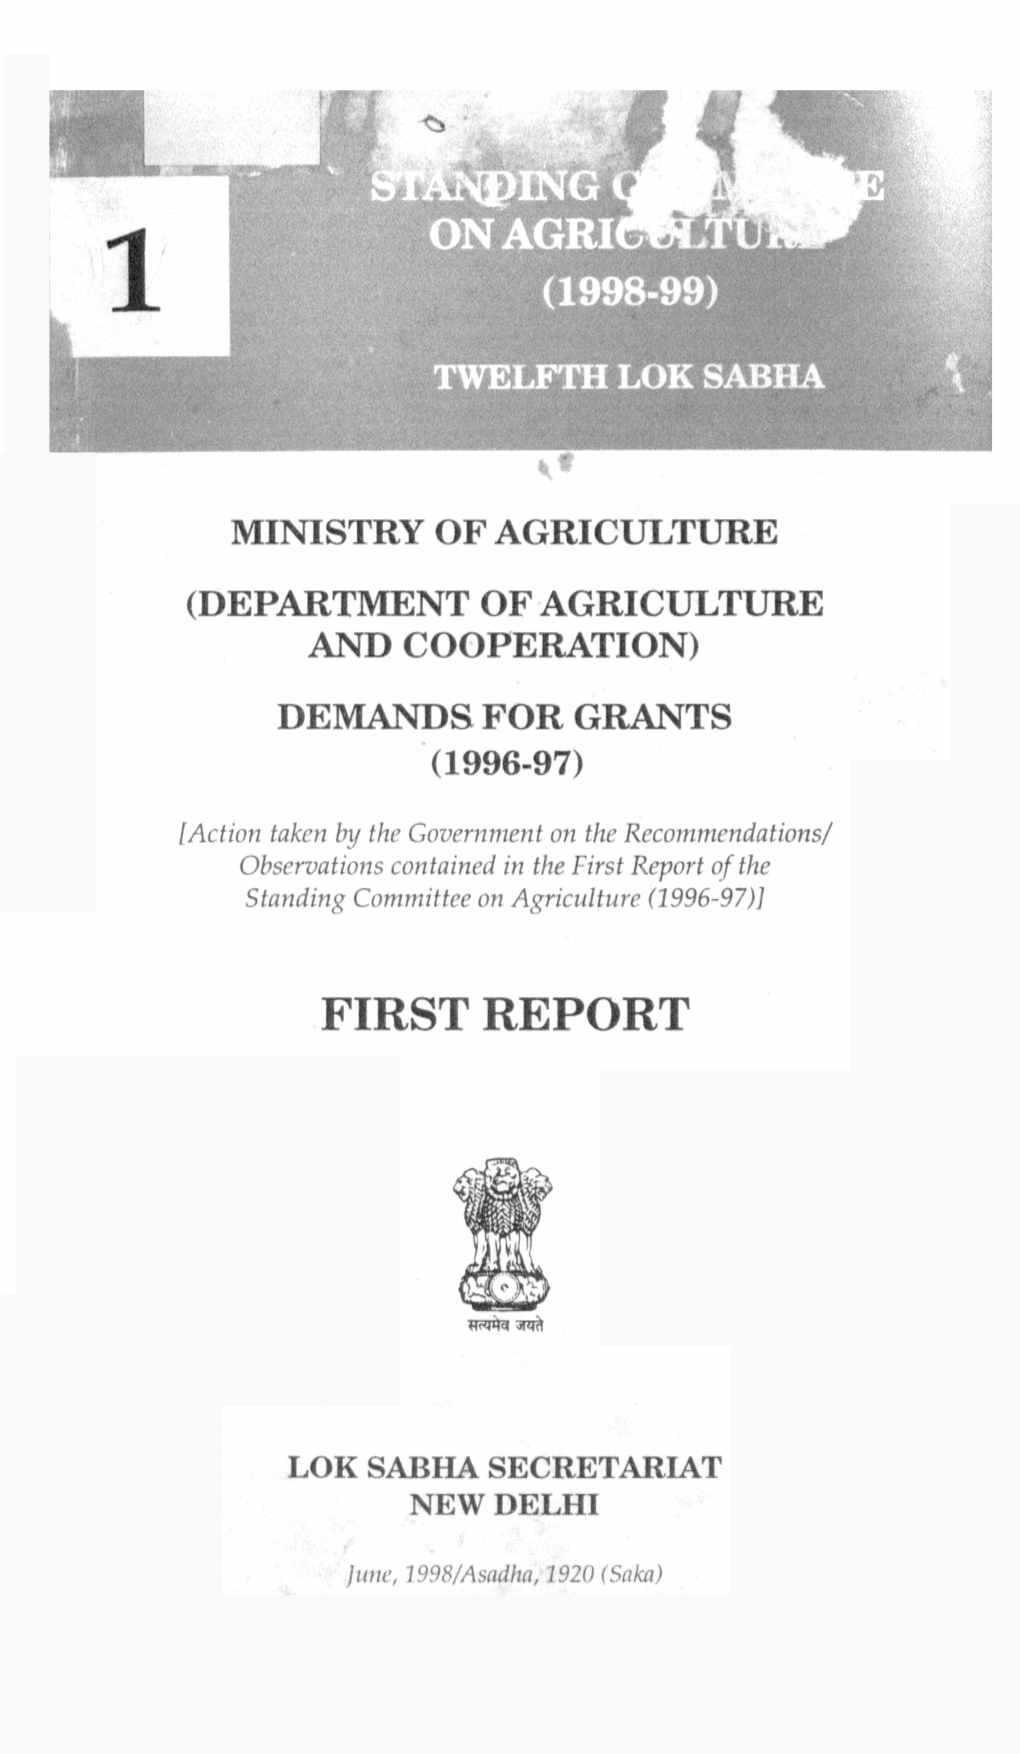 Ministry of Agriculture (Department of Agriculture and Cooperation) Demands for Grants (1996-97)